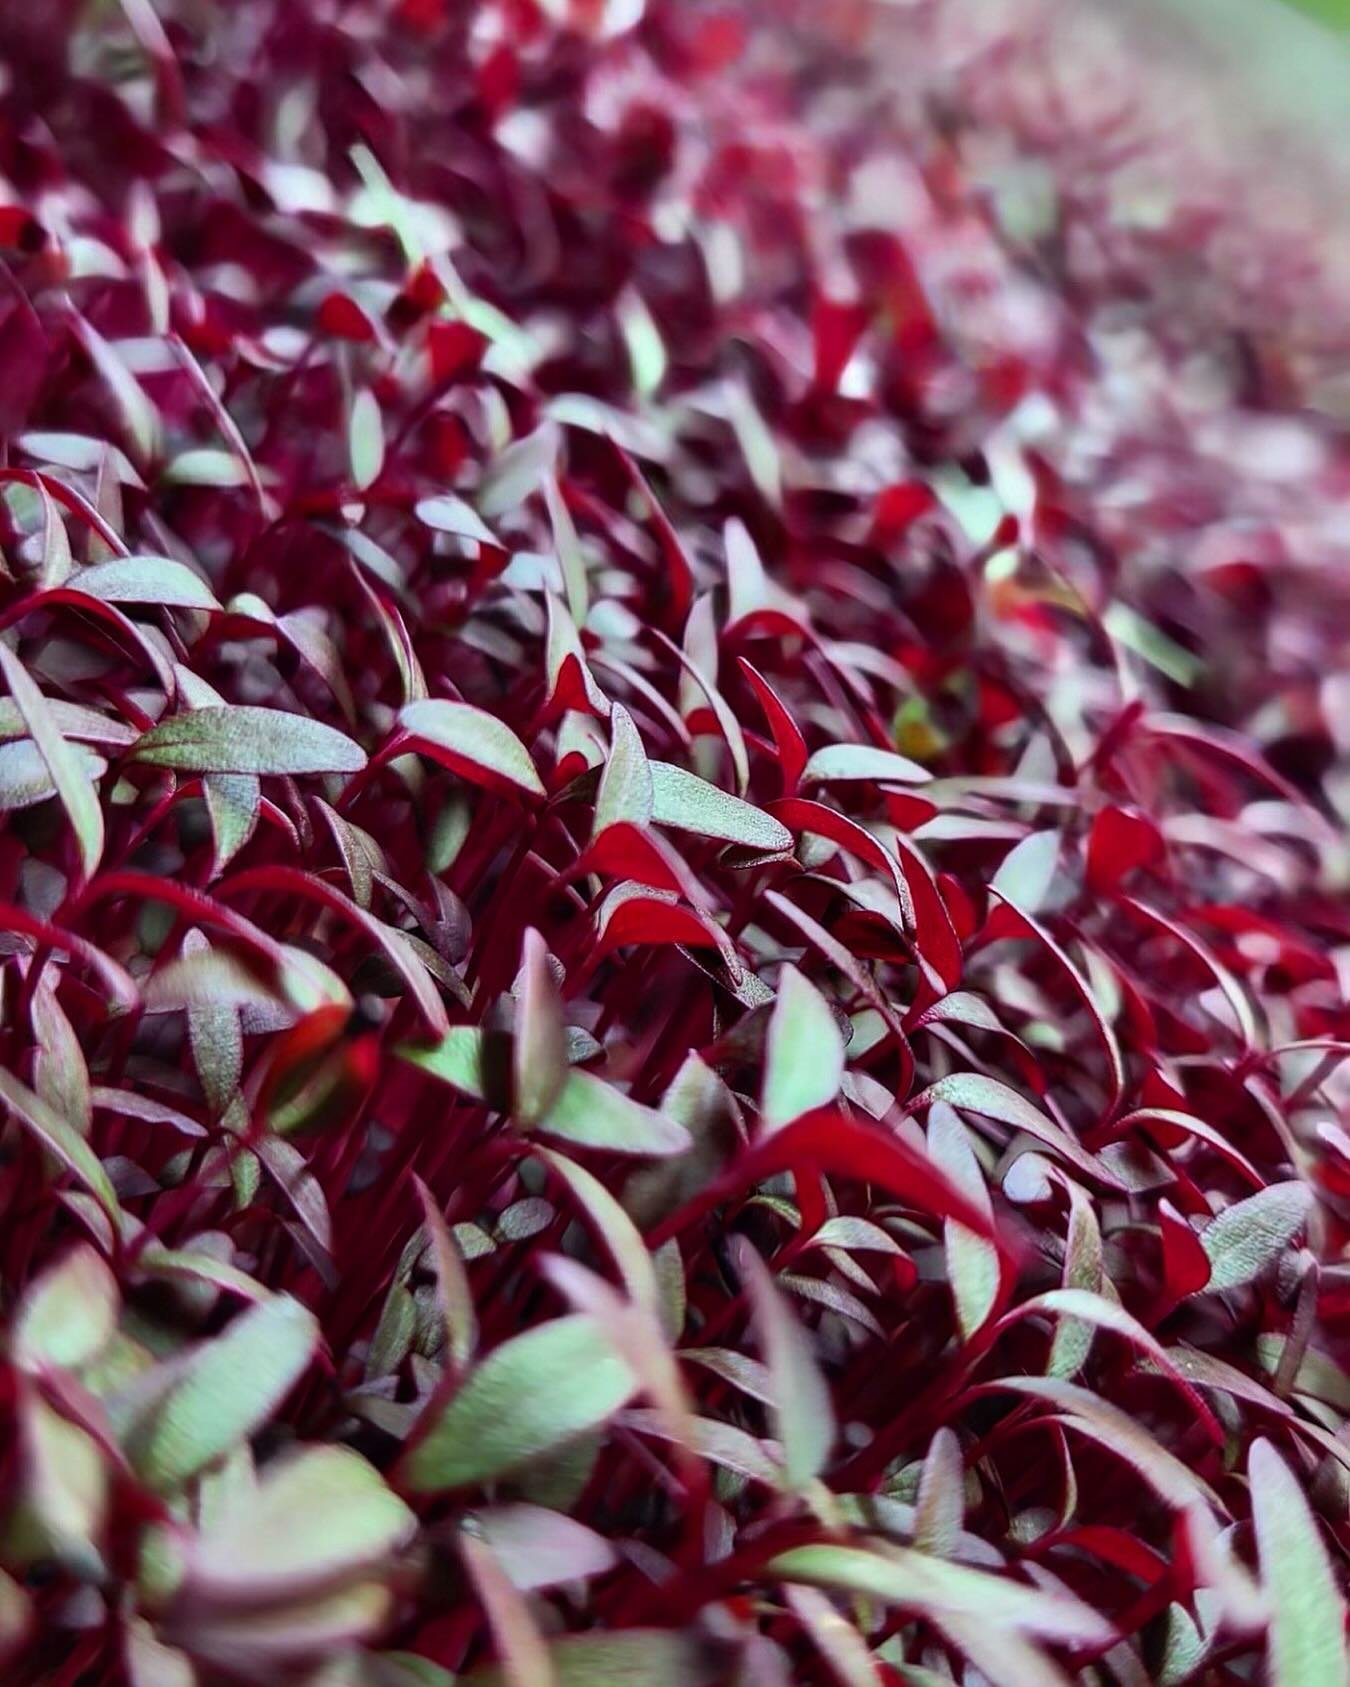 Amaranth is a farm favorite with its vibrant garnet colour and earthy, beet flavor 🌱🌱 #microacres #yyc #culinary #amaranth #springflavors #beet #chefstable #veganlife #airdrie